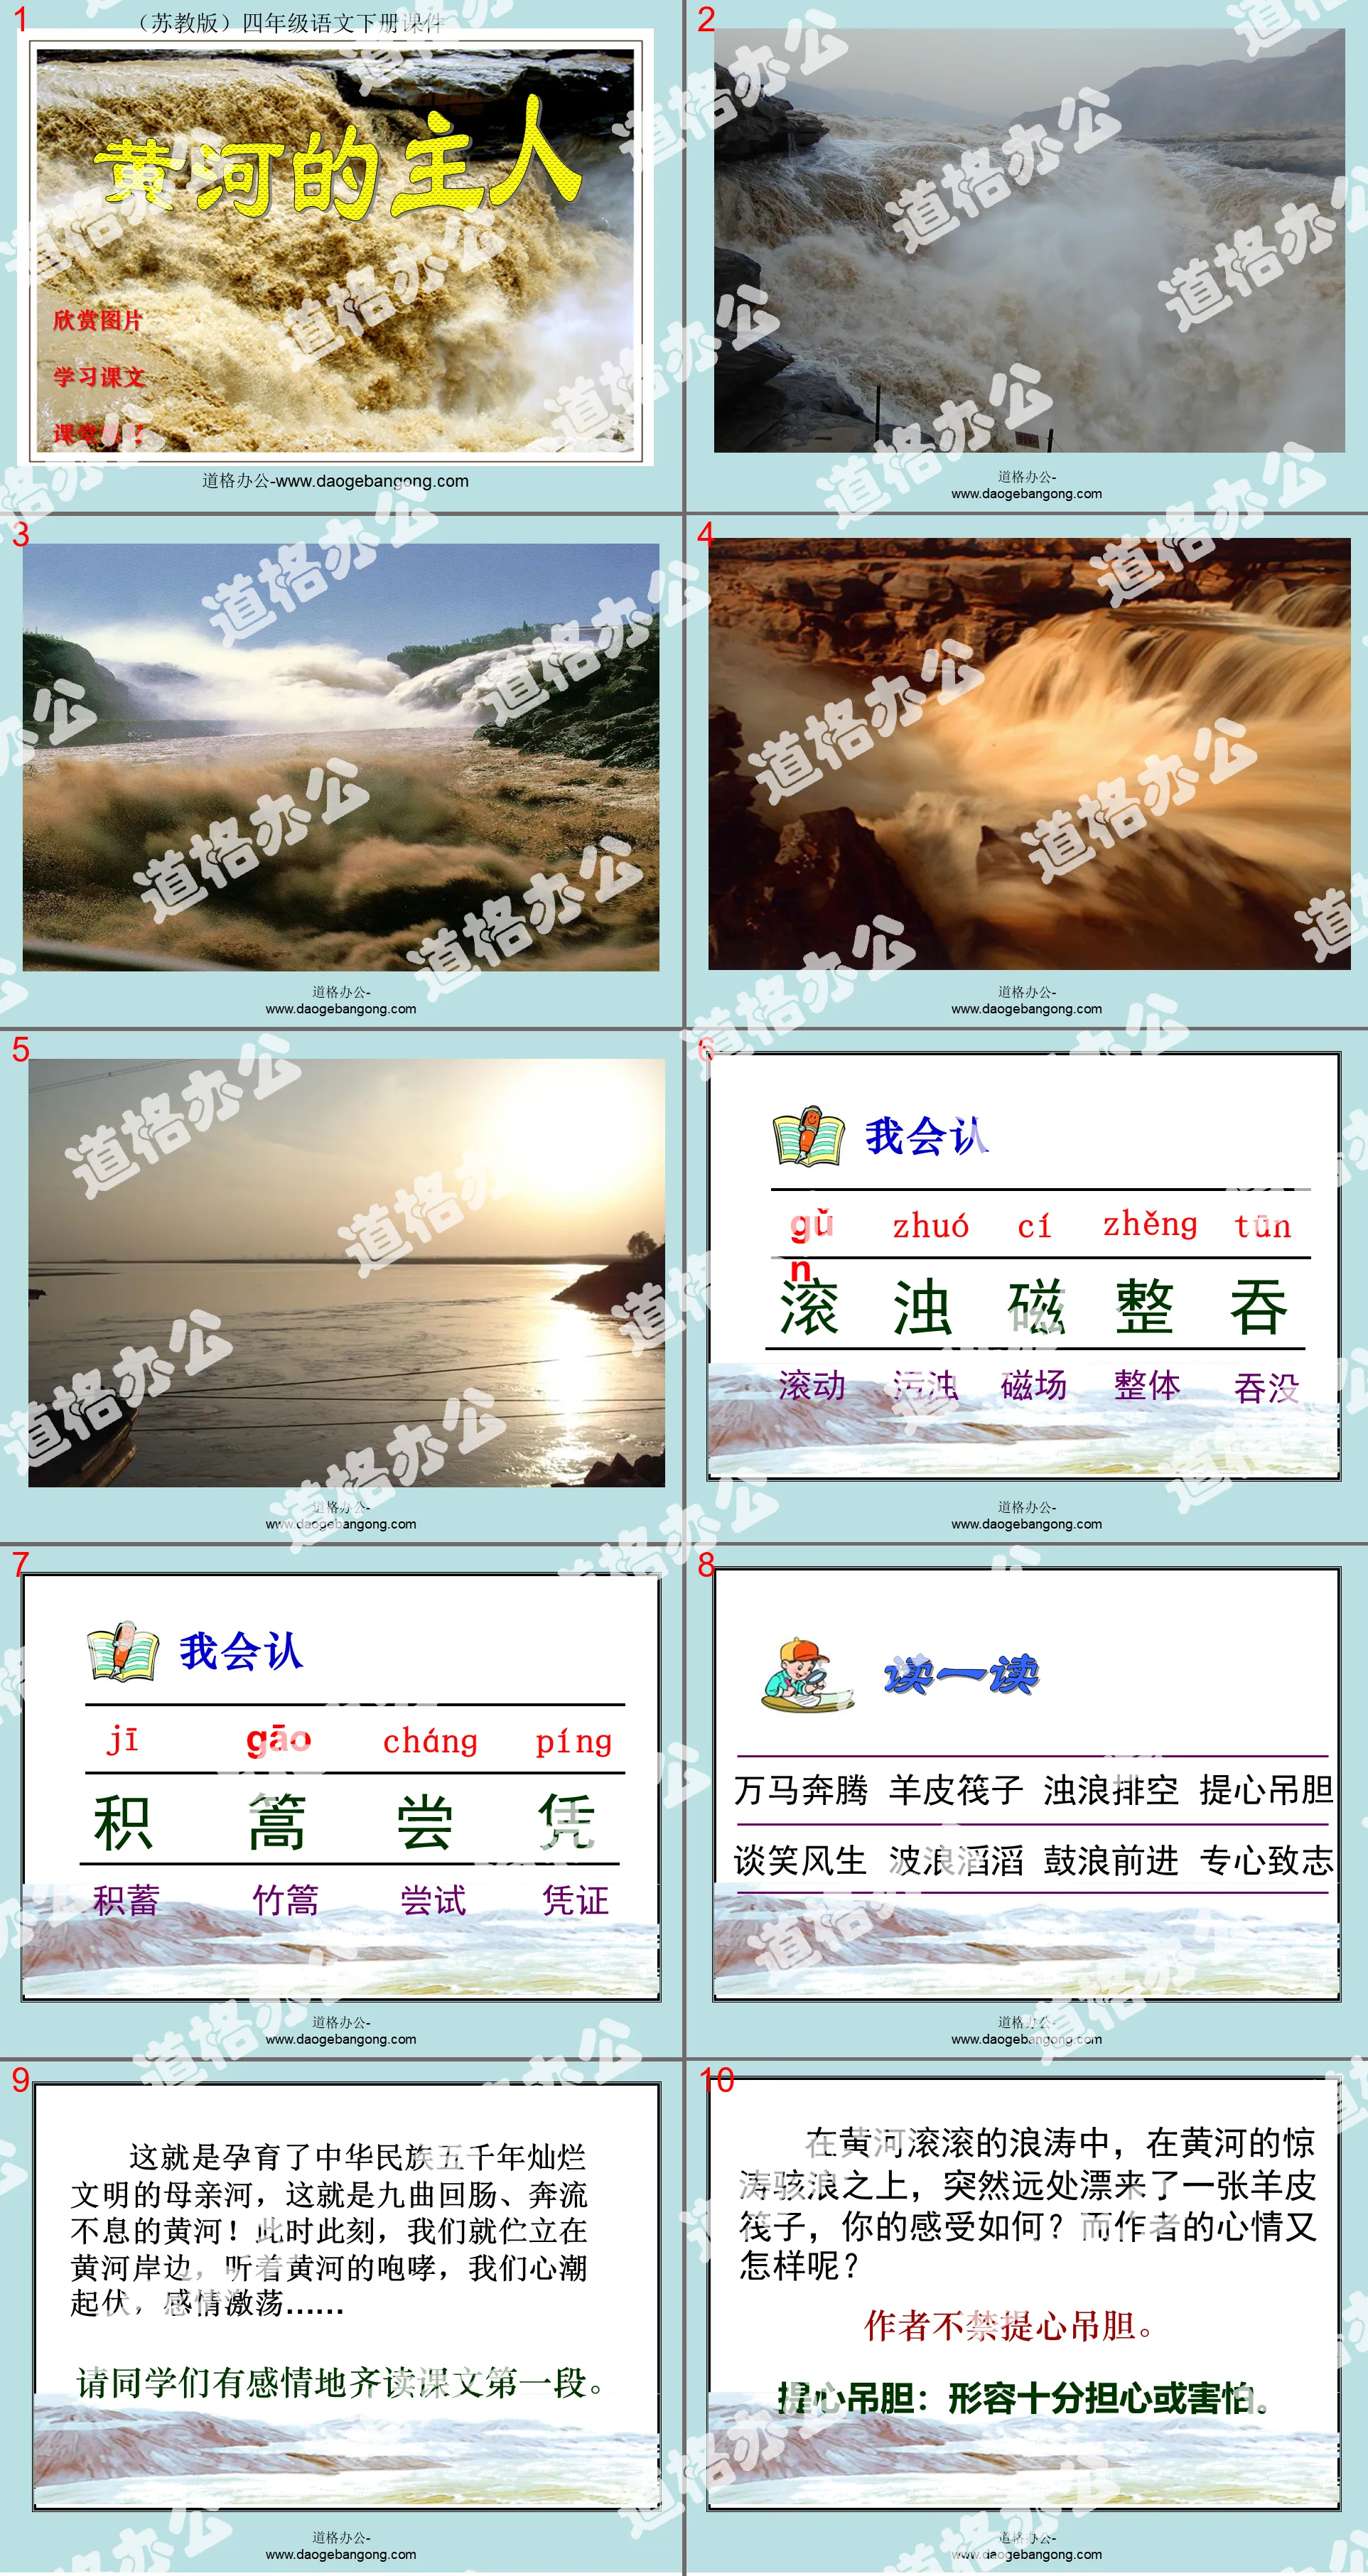 "Master of the Yellow River" PPT courseware